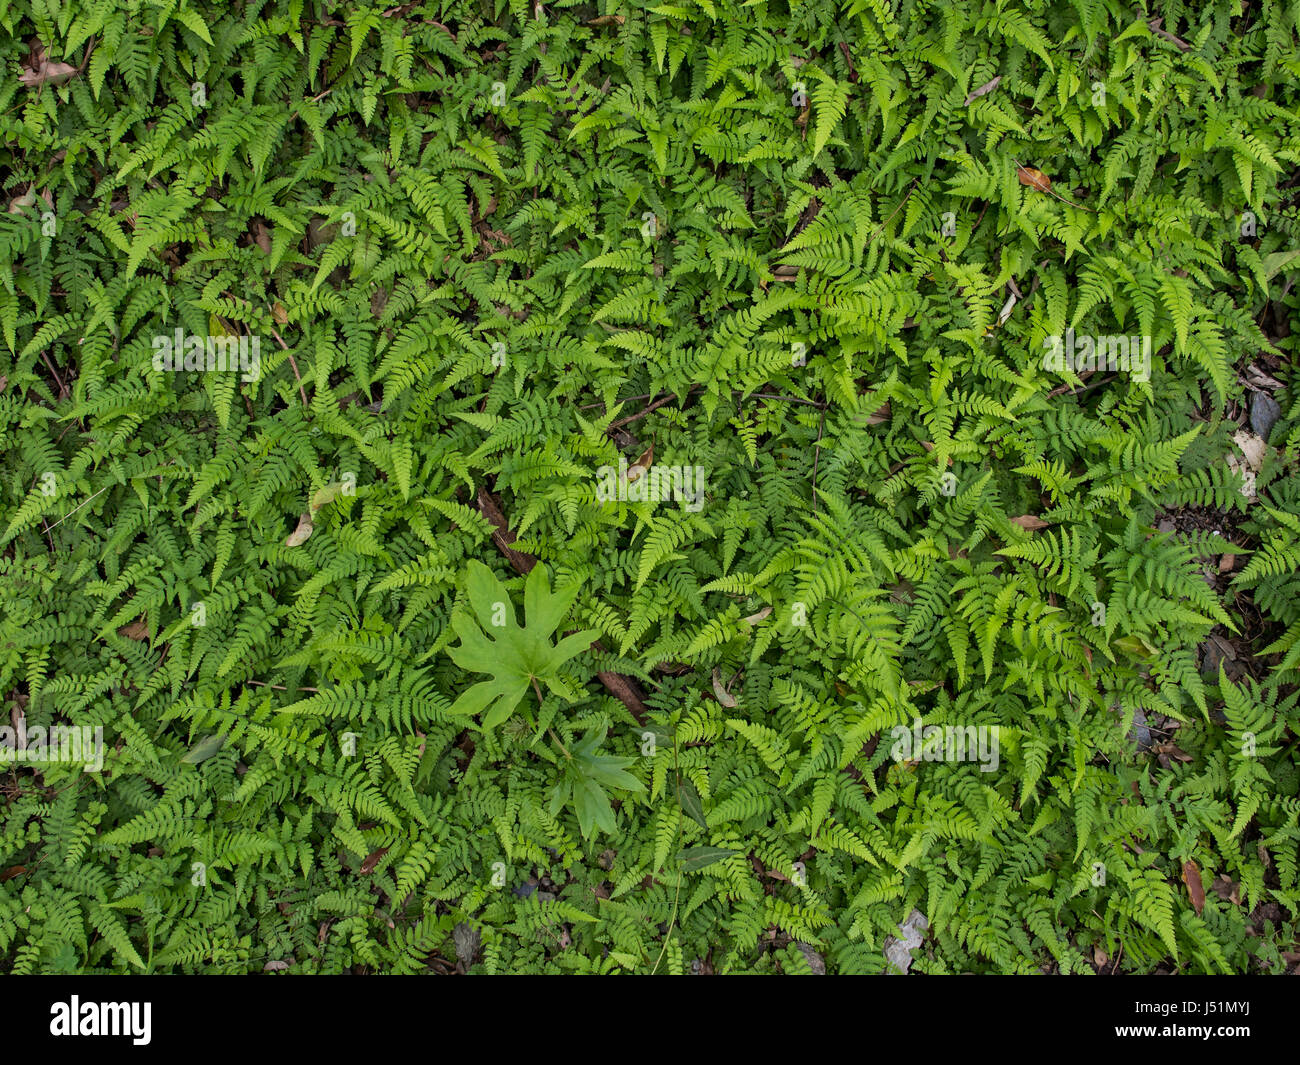 Background from the green fern leaves Stock Photo